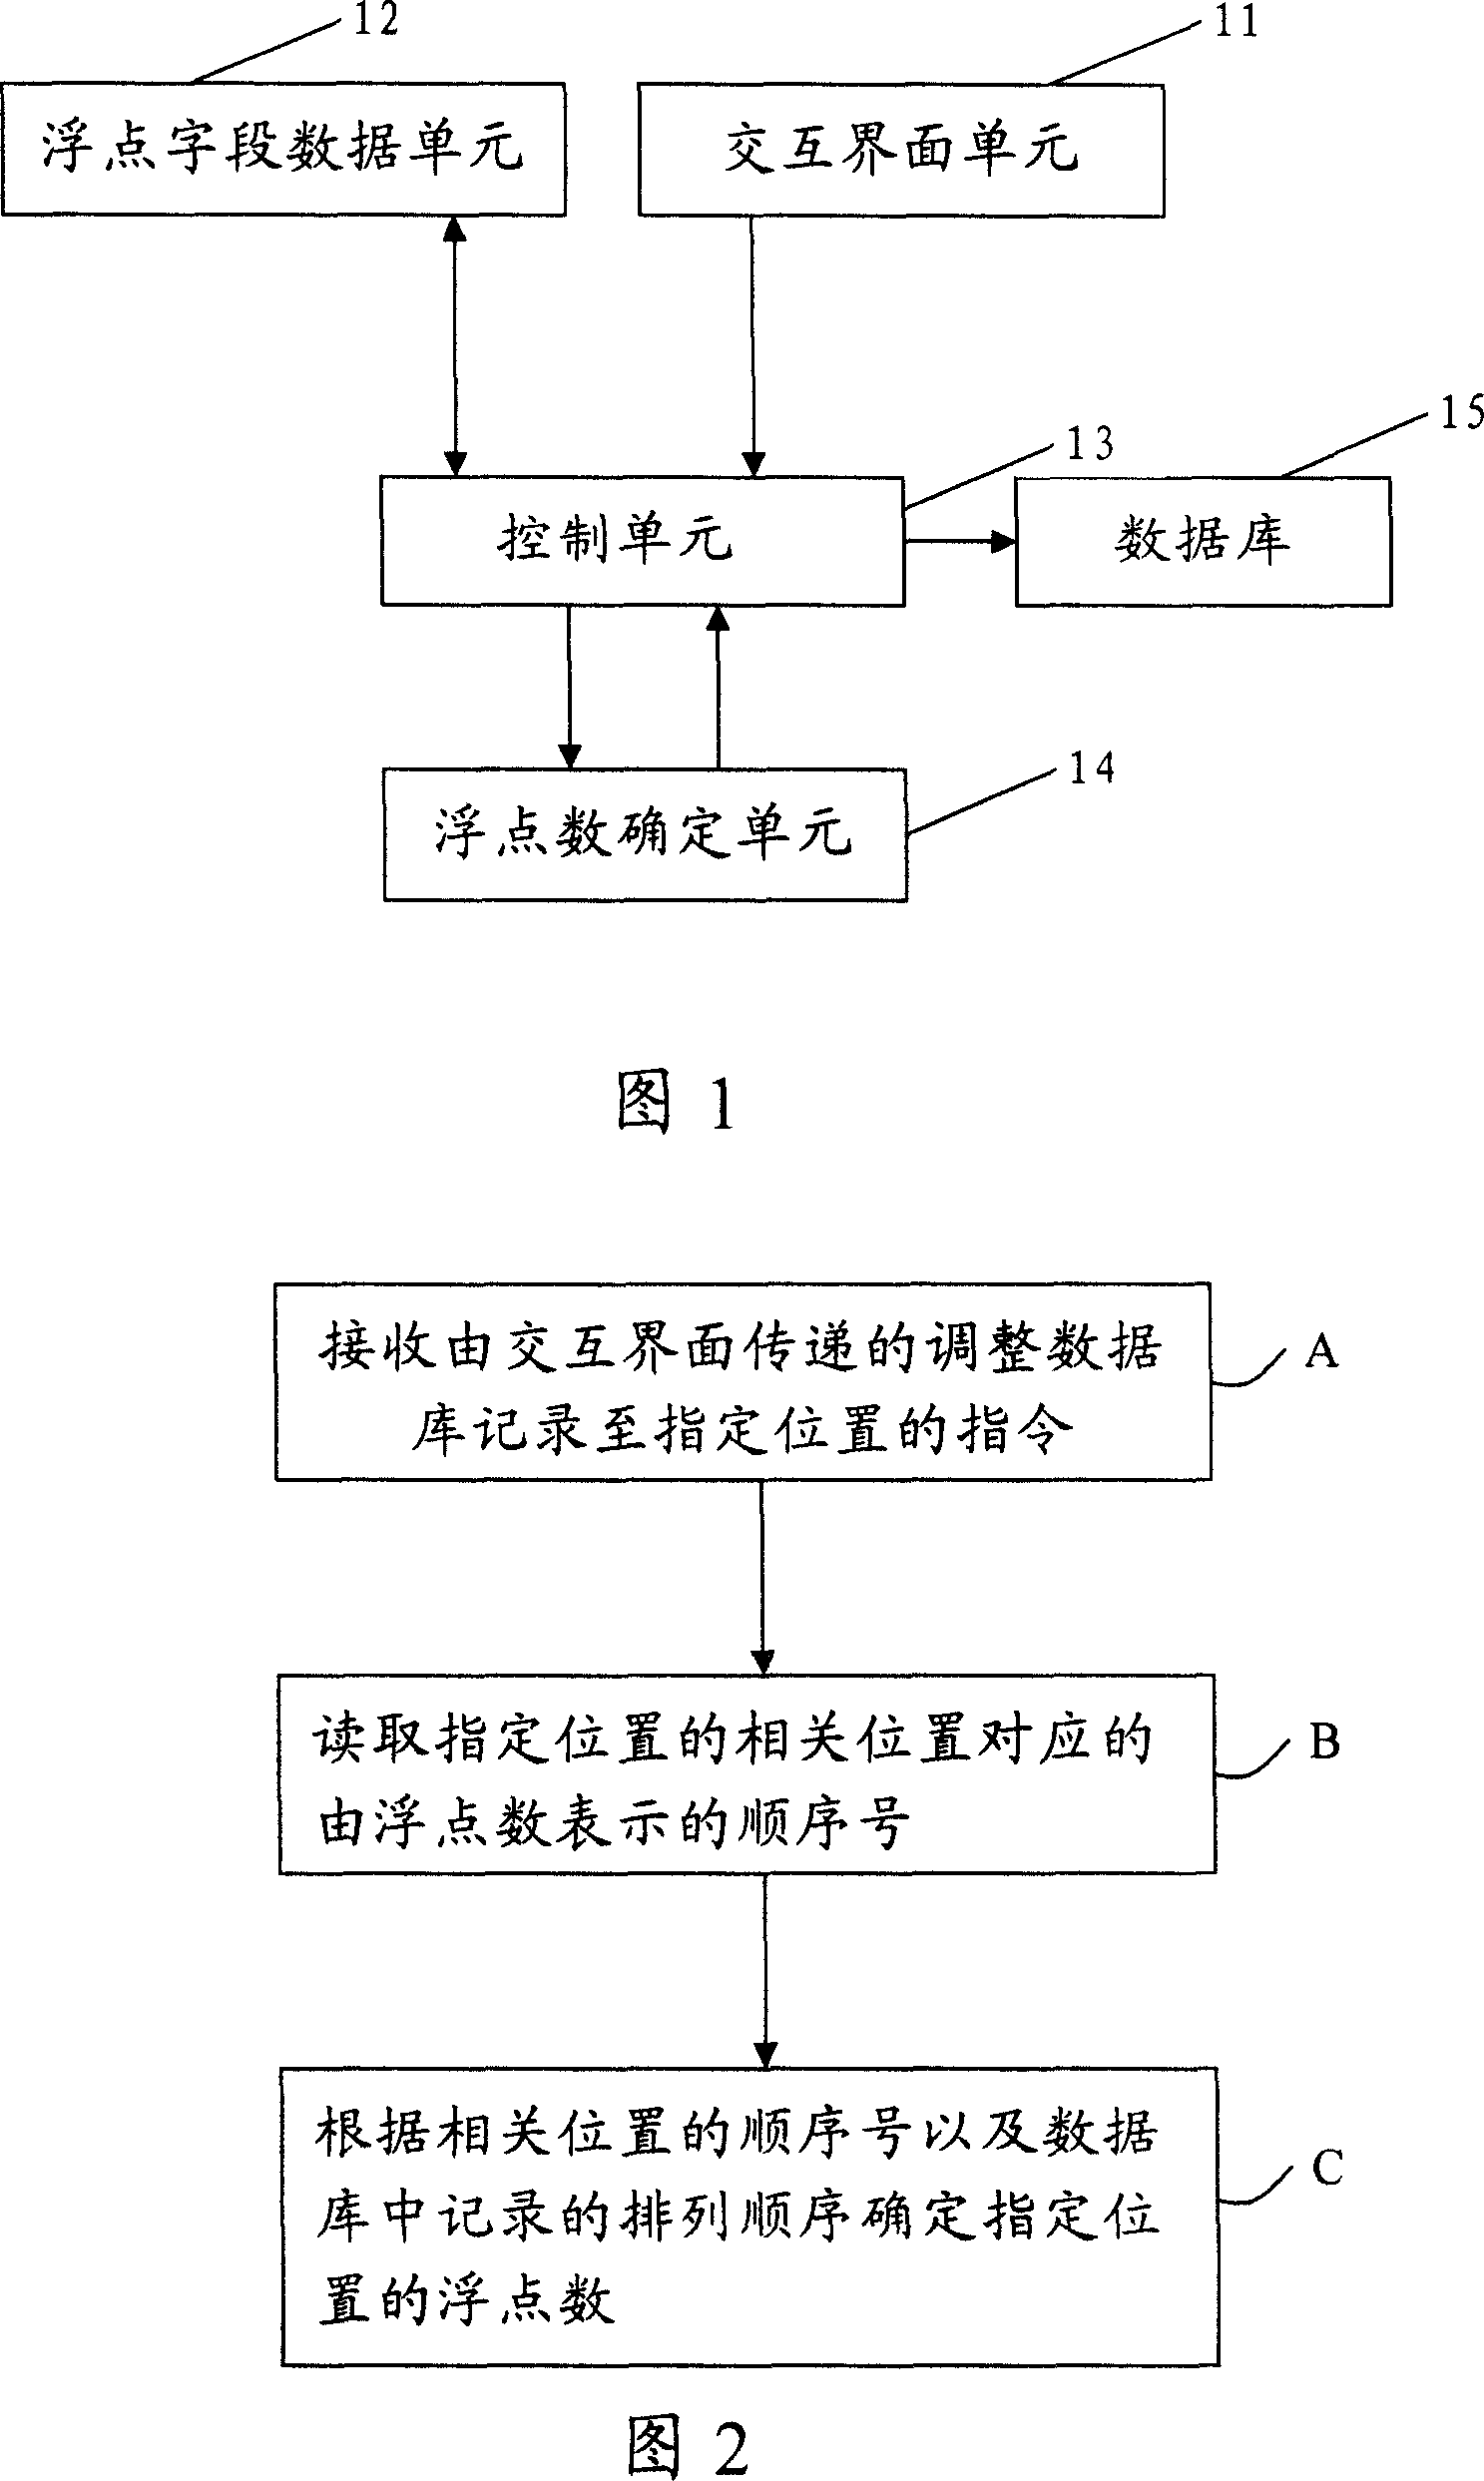 Data bank recording sequence regulating system and method